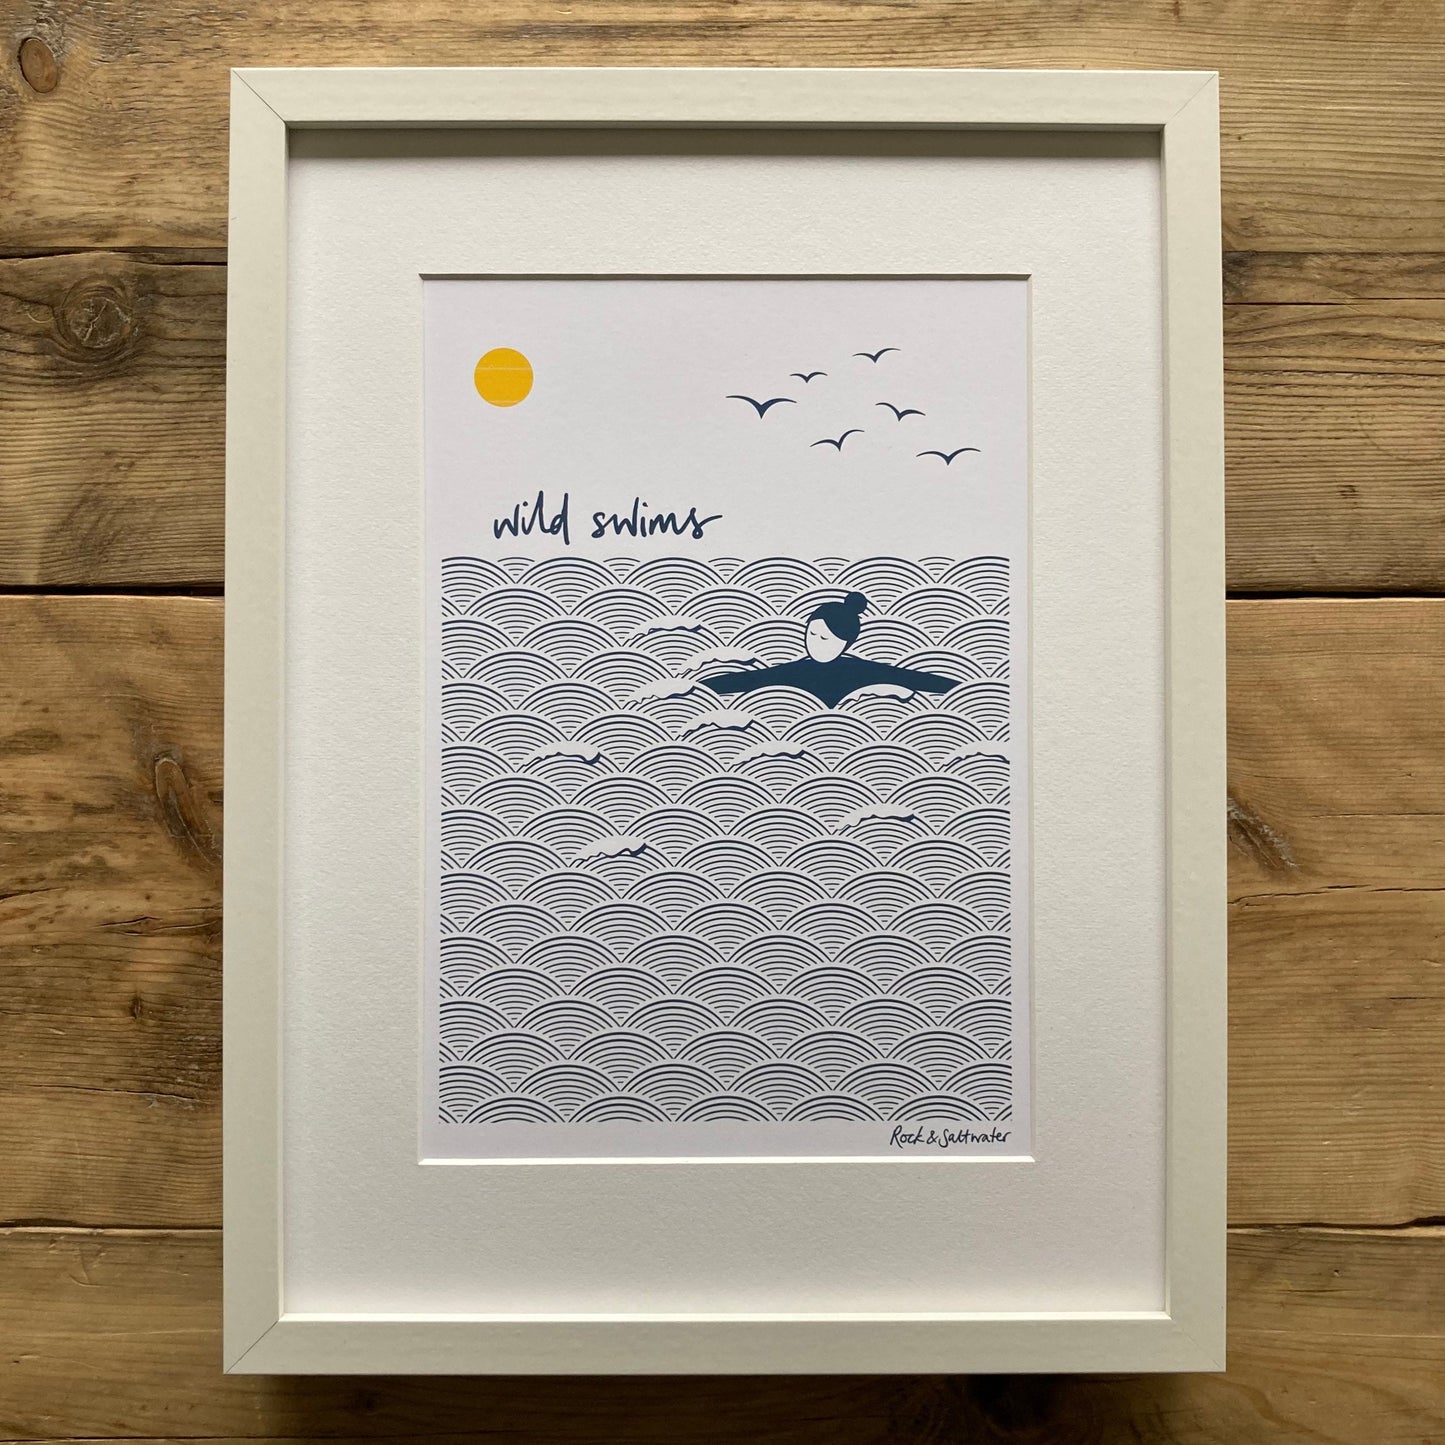 Wild swims art print, unframed | A5 and A4 sizes available